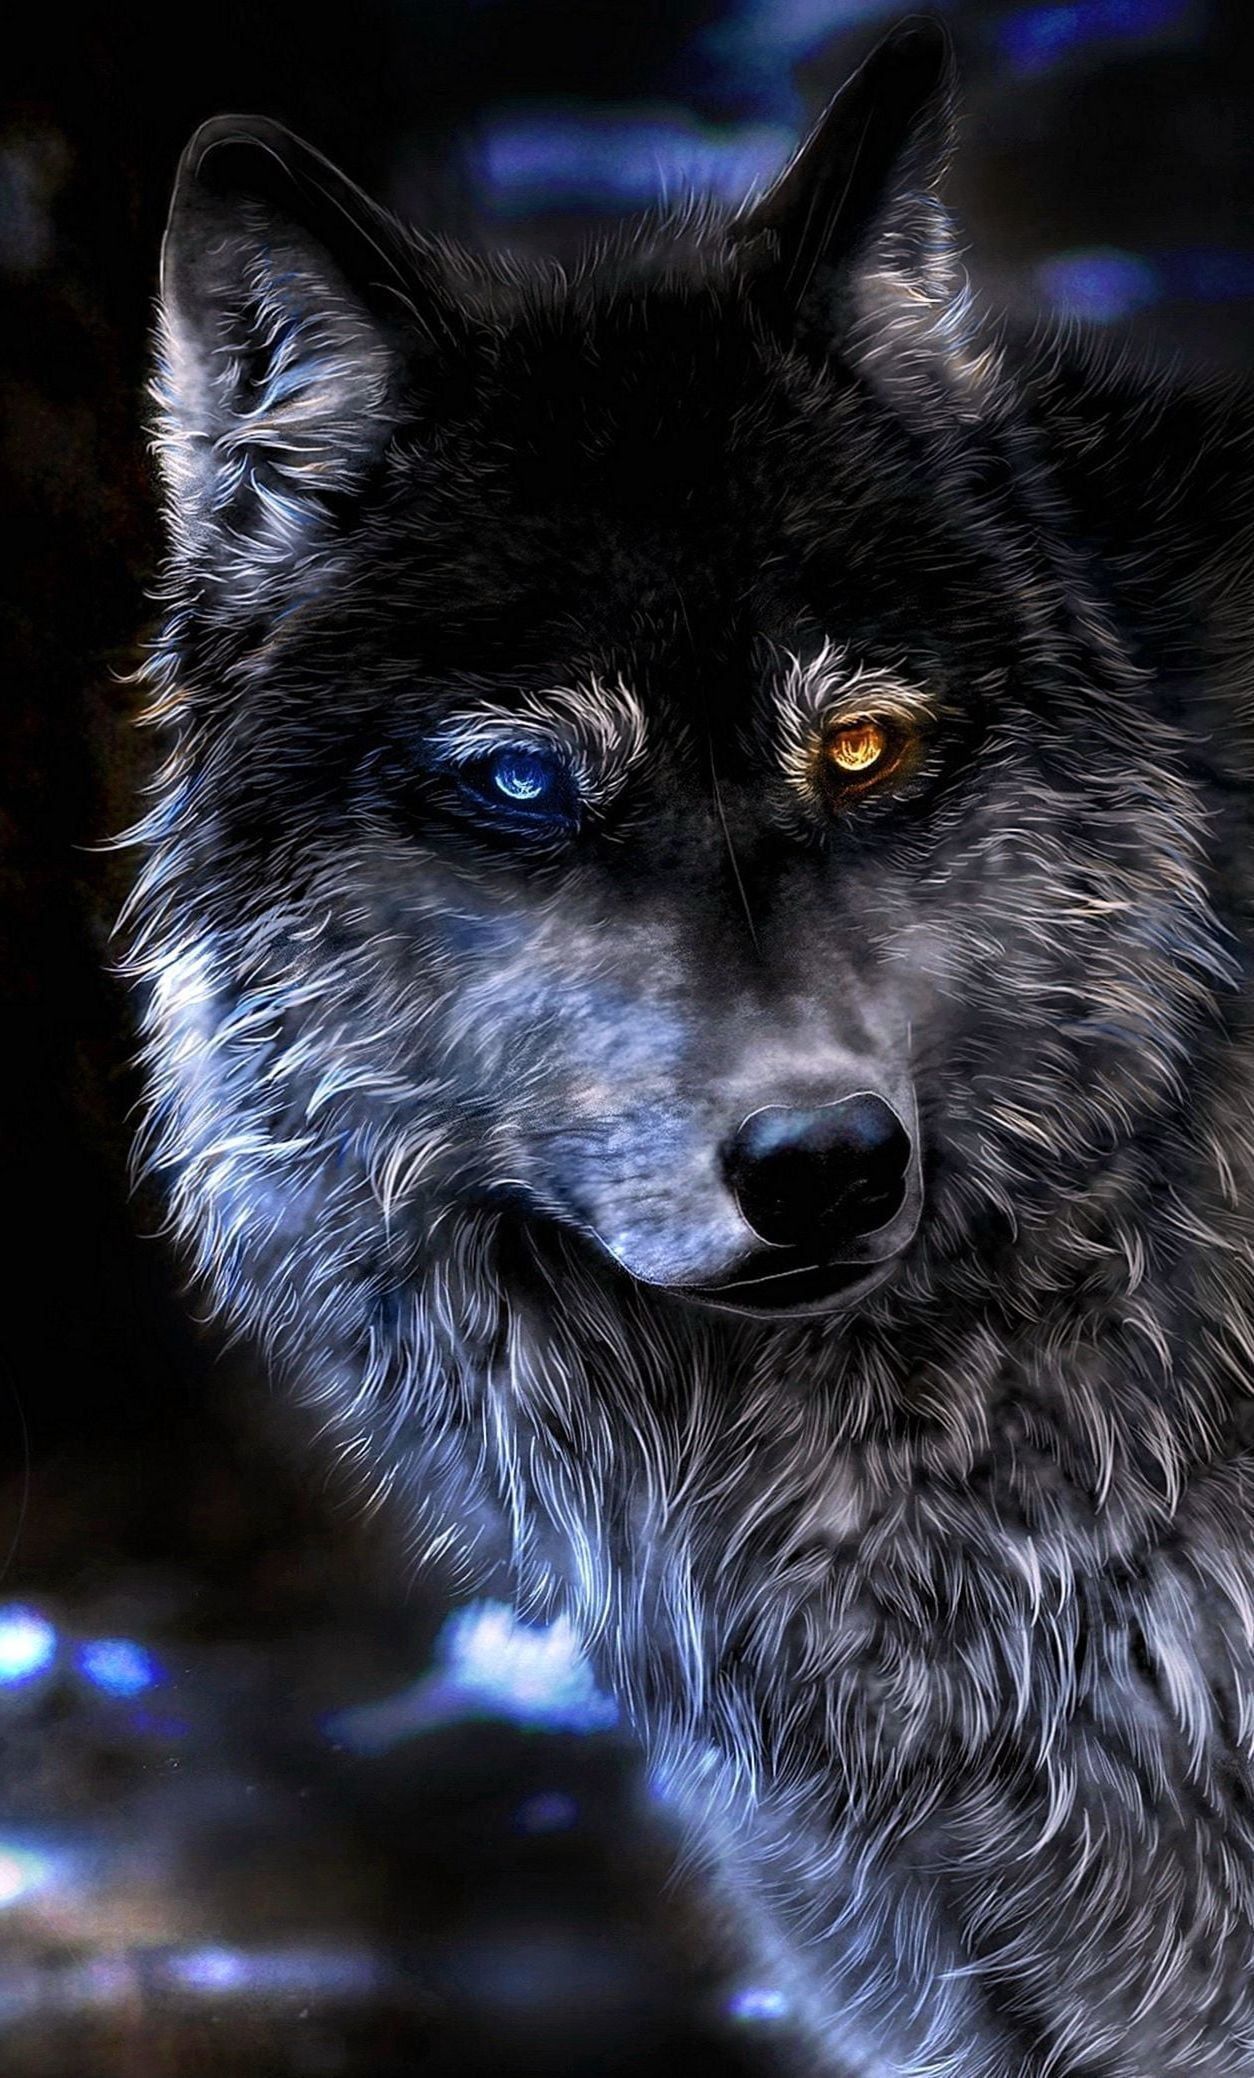 Angry Wolf Wallpaper 4K iPhone #Angry #Wolf #Wallpaper K #iPhone. iPhone wallpaper wolf, Wolf wallpaper, Angry wolf